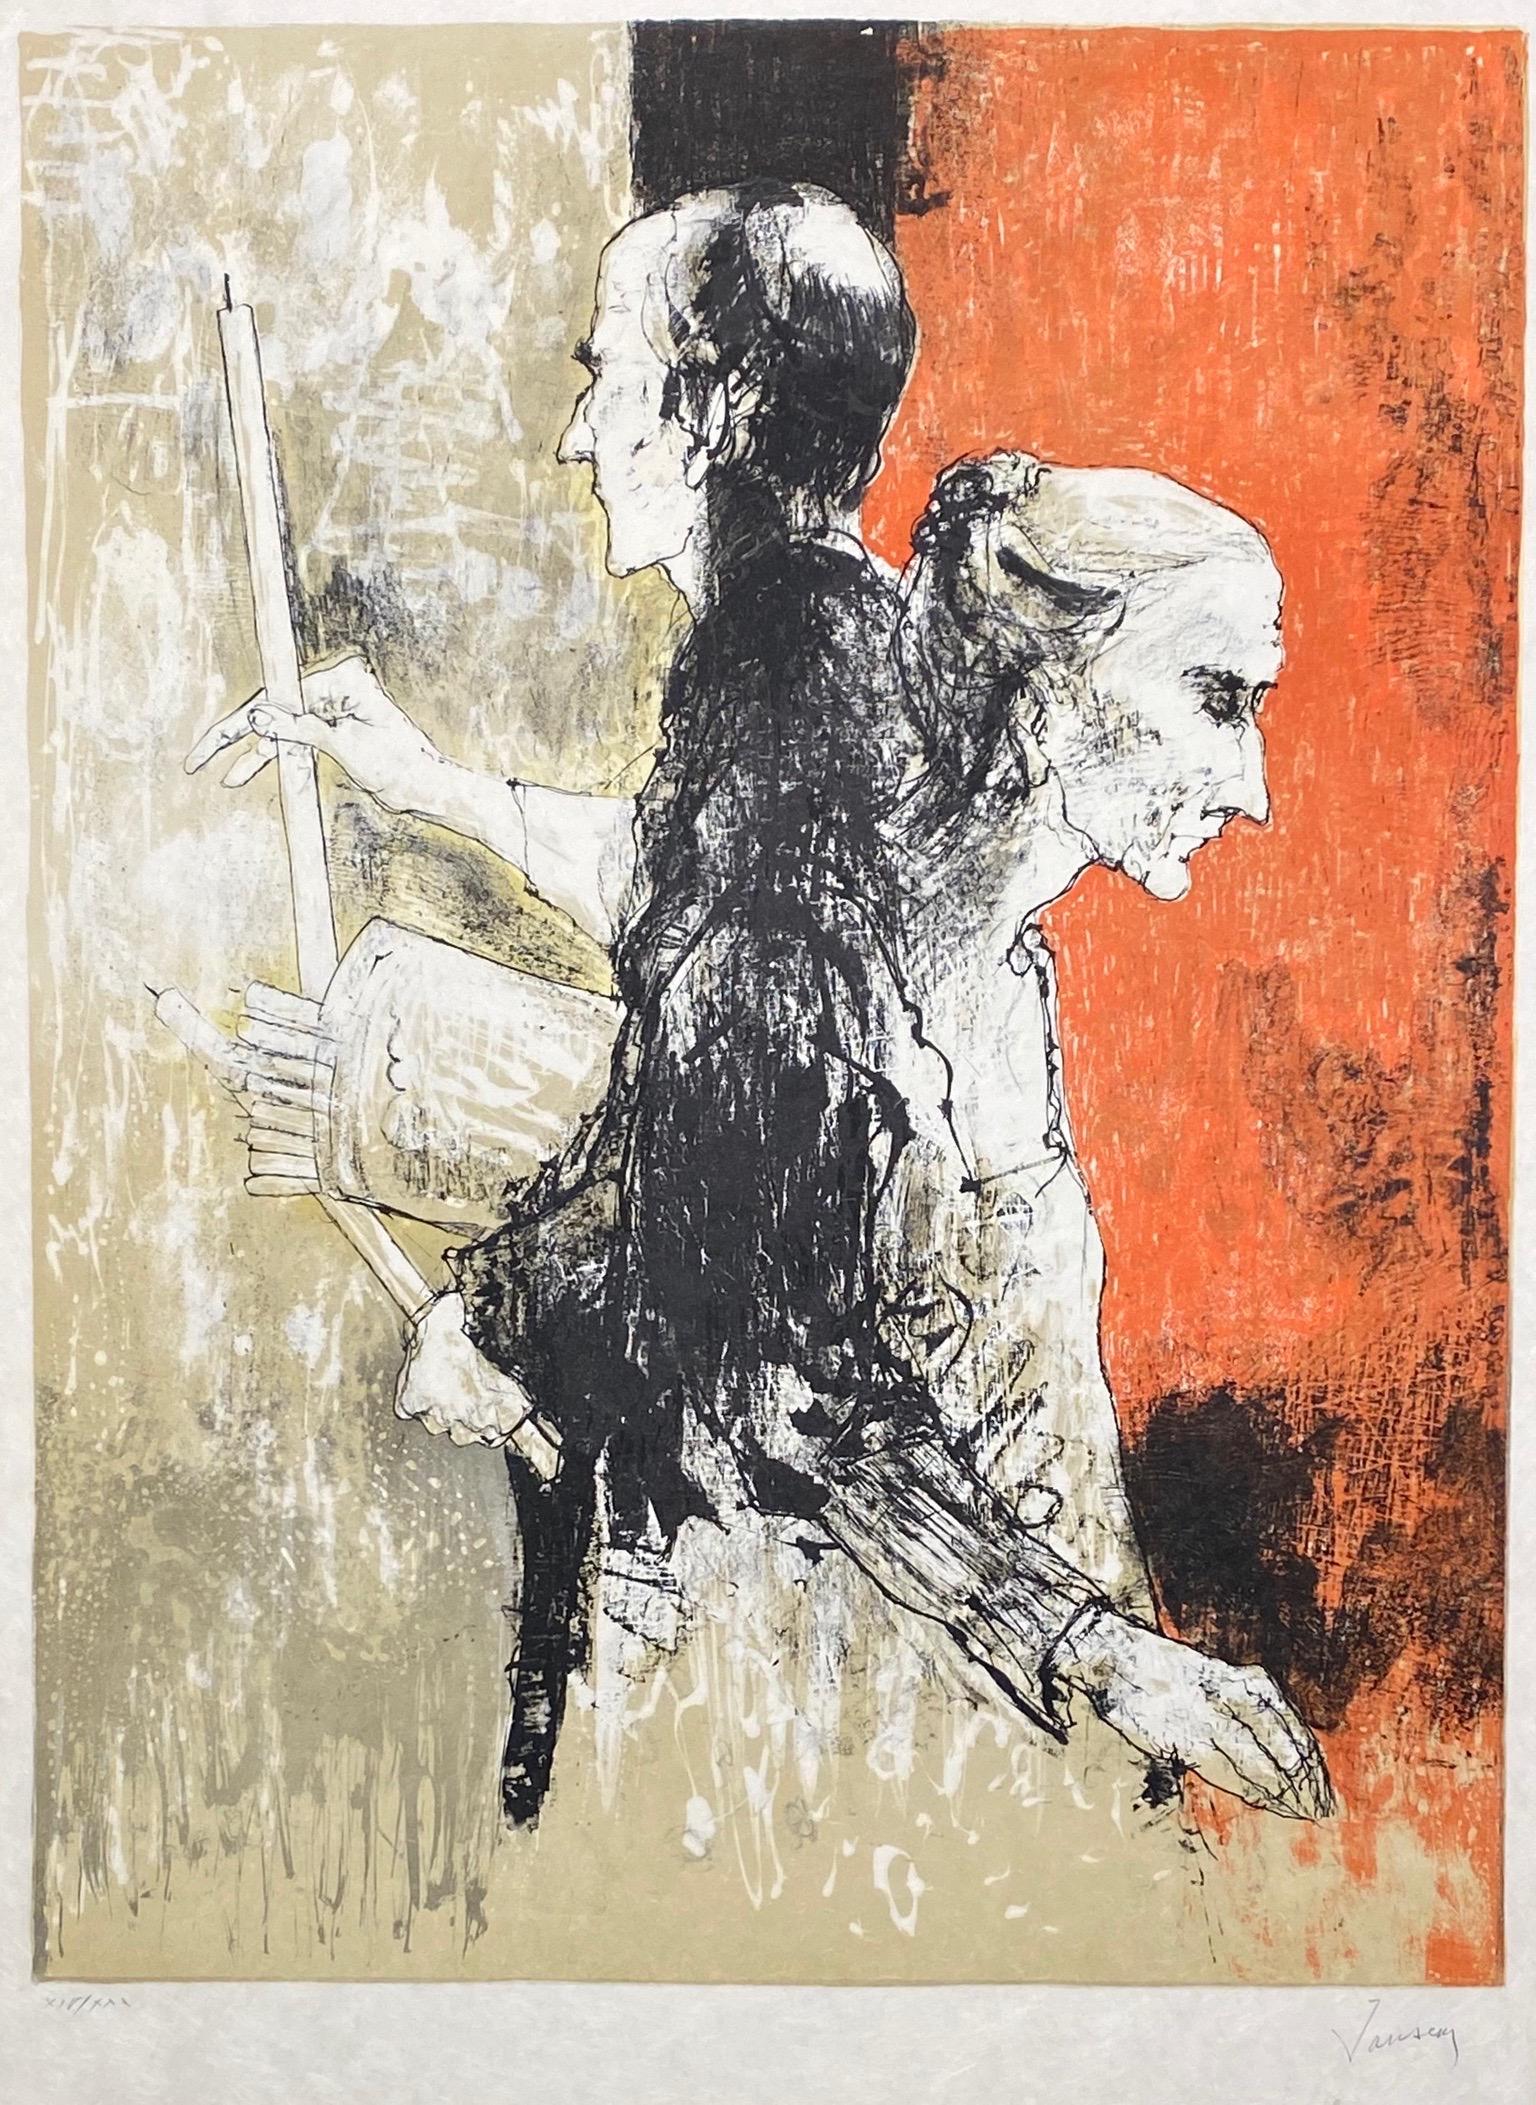 Pèlerin au cierge, 1986, original lithograph by Jean Jansem, signed and numbered